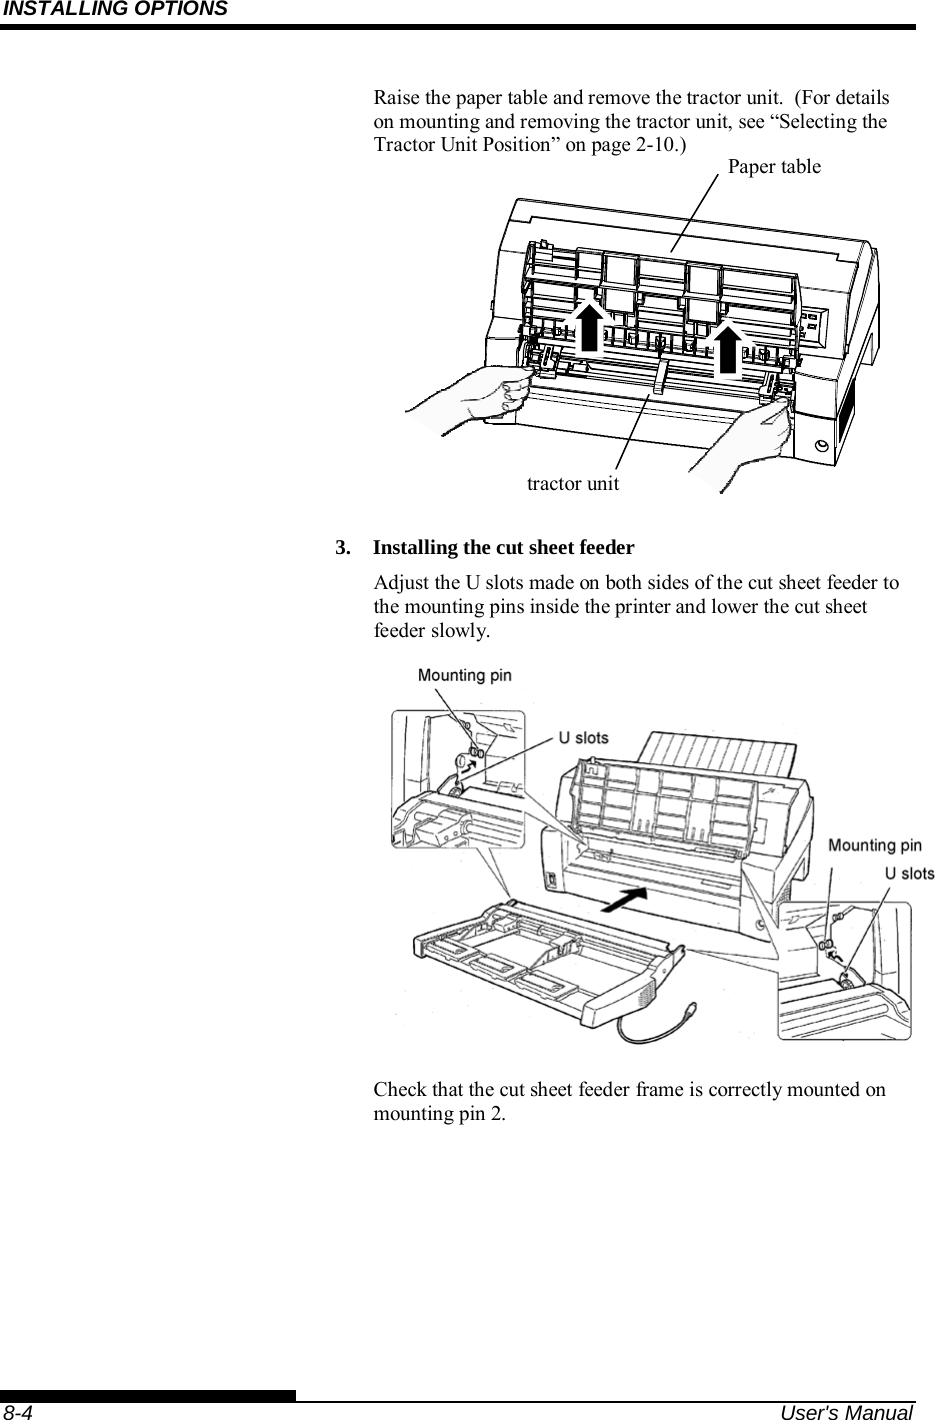 INSTALLING OPTIONS    8-4  User&apos;s Manual Raise the paper table and remove the tractor unit.  (For details on mounting and removing the tractor unit, see “Selecting the Tractor Unit Position” on page 2-10.)           3.  Installing the cut sheet feeder Adjust the U slots made on both sides of the cut sheet feeder to the mounting pins inside the printer and lower the cut sheet feeder slowly.    Check that the cut sheet feeder frame is correctly mounted on mounting pin 2. Paper table tractor unit 